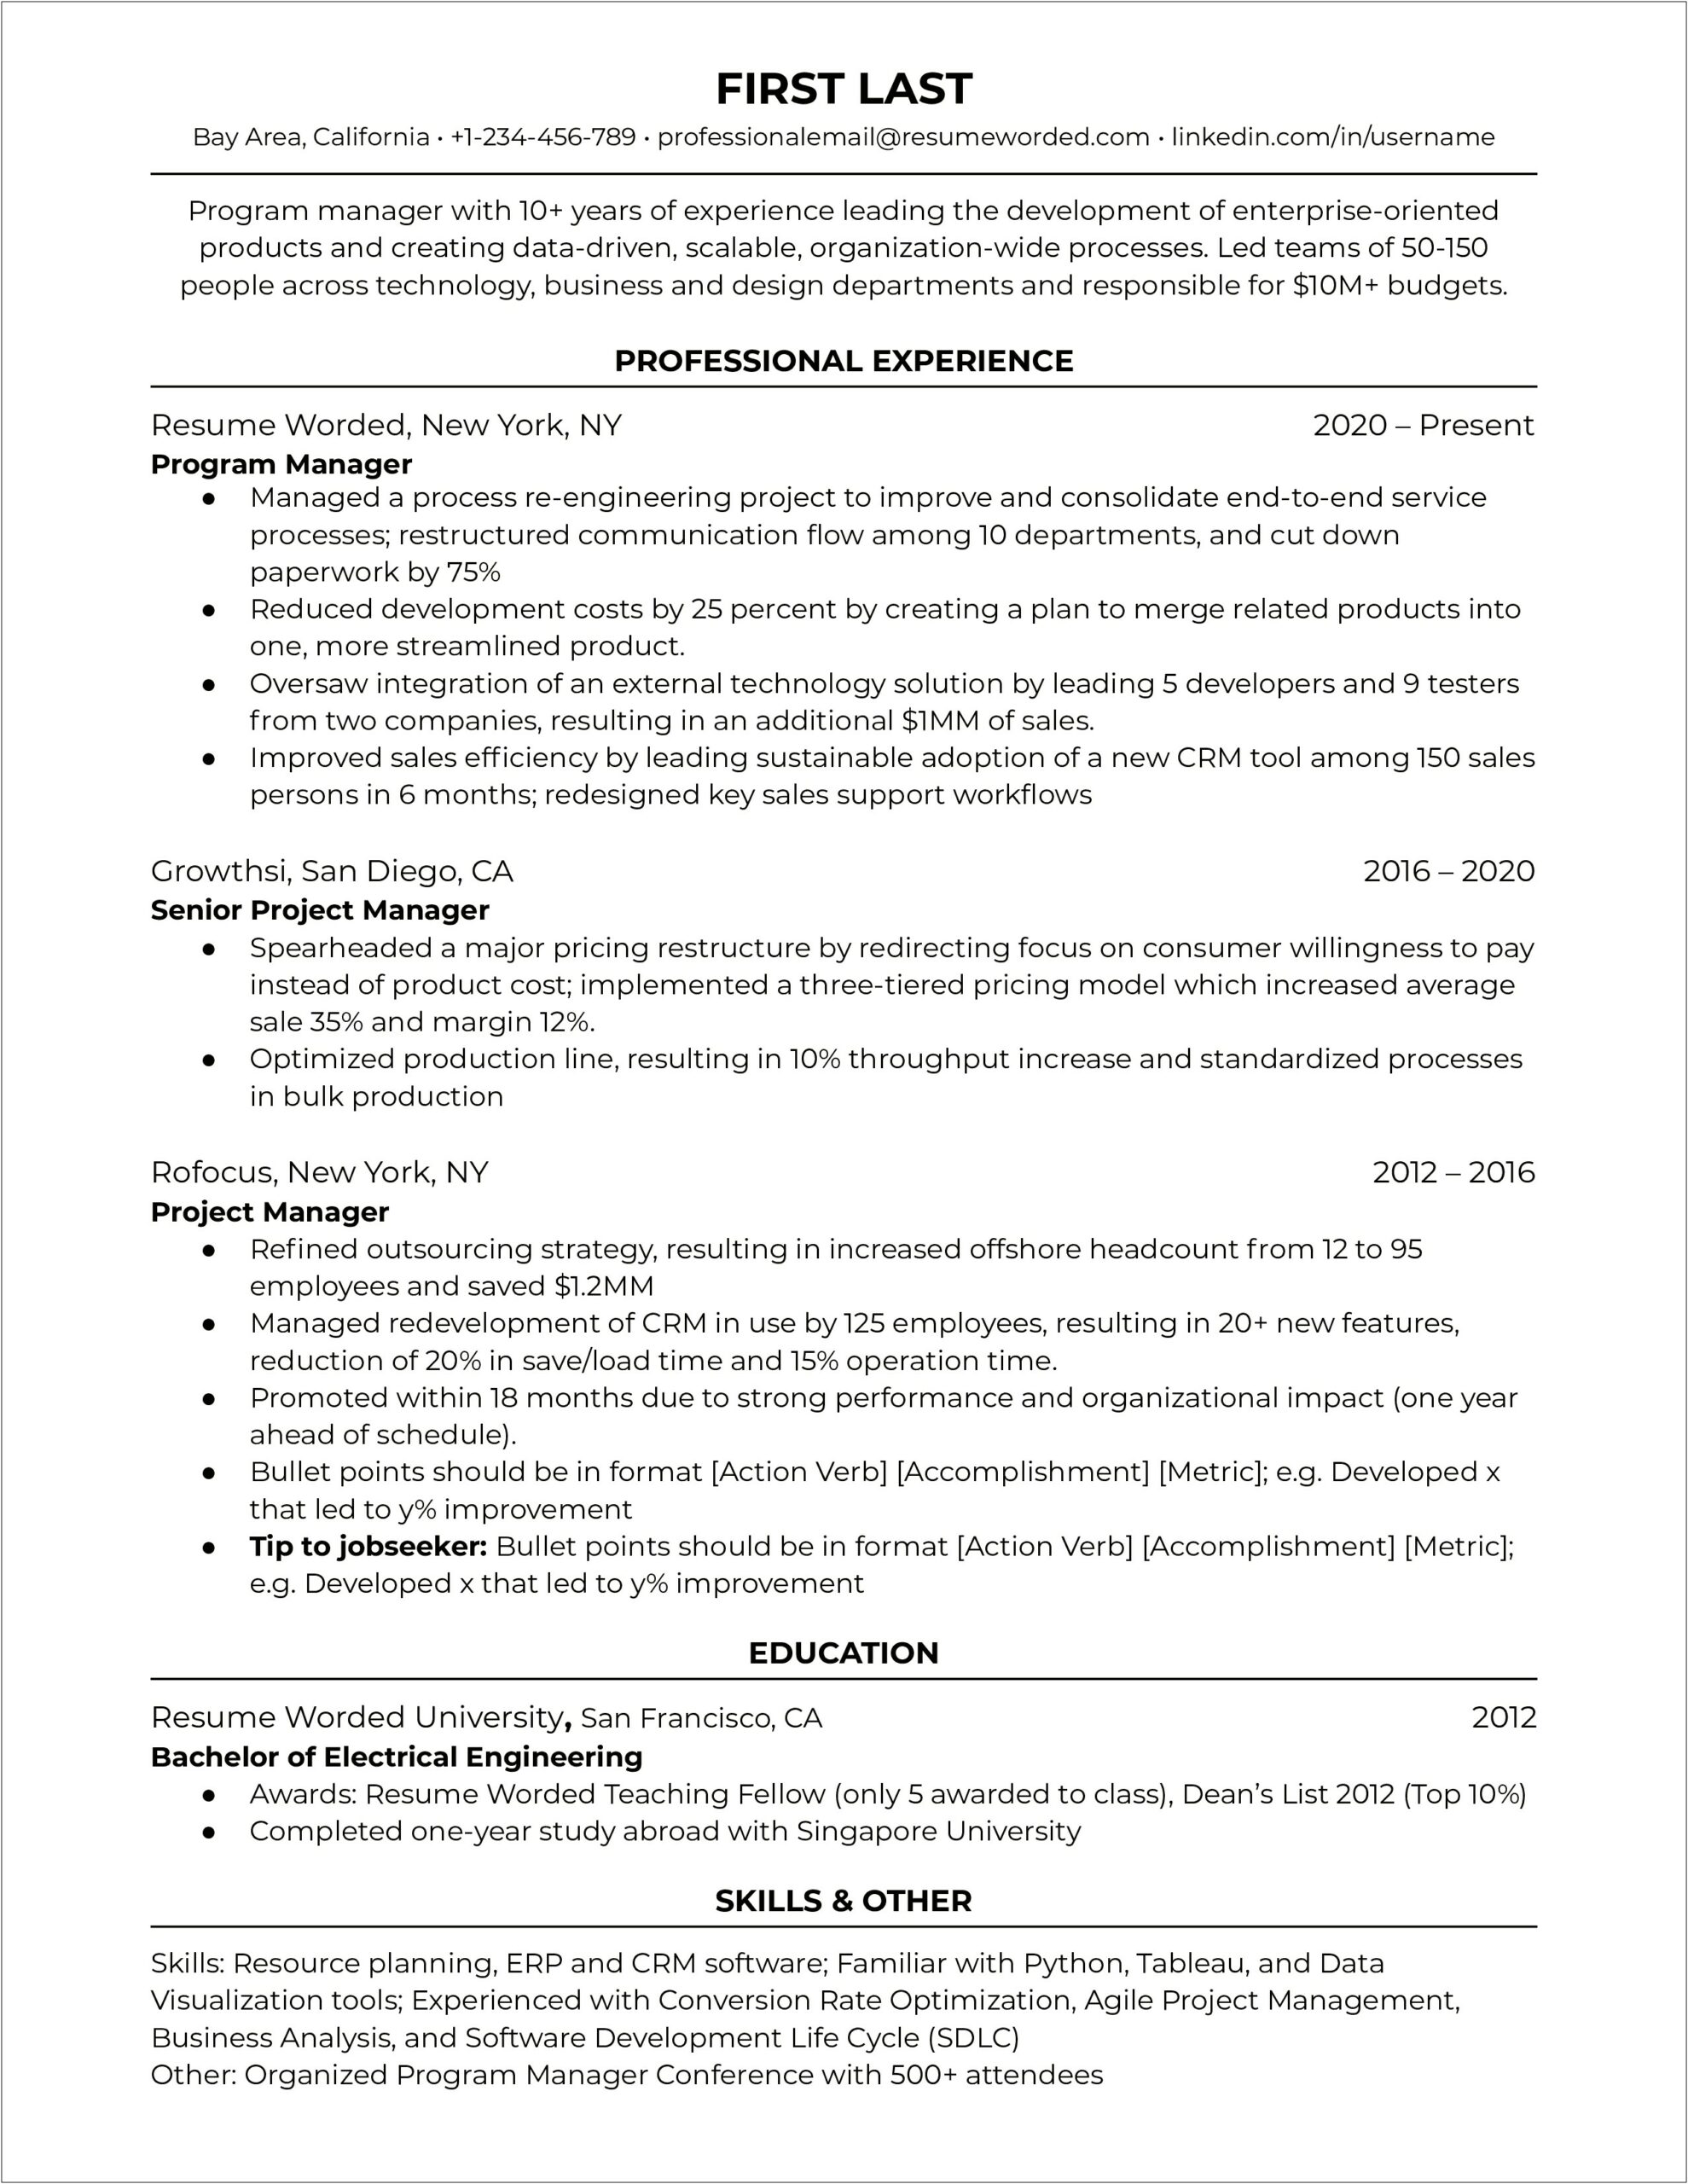 Resume Samples For Technical Program Managers